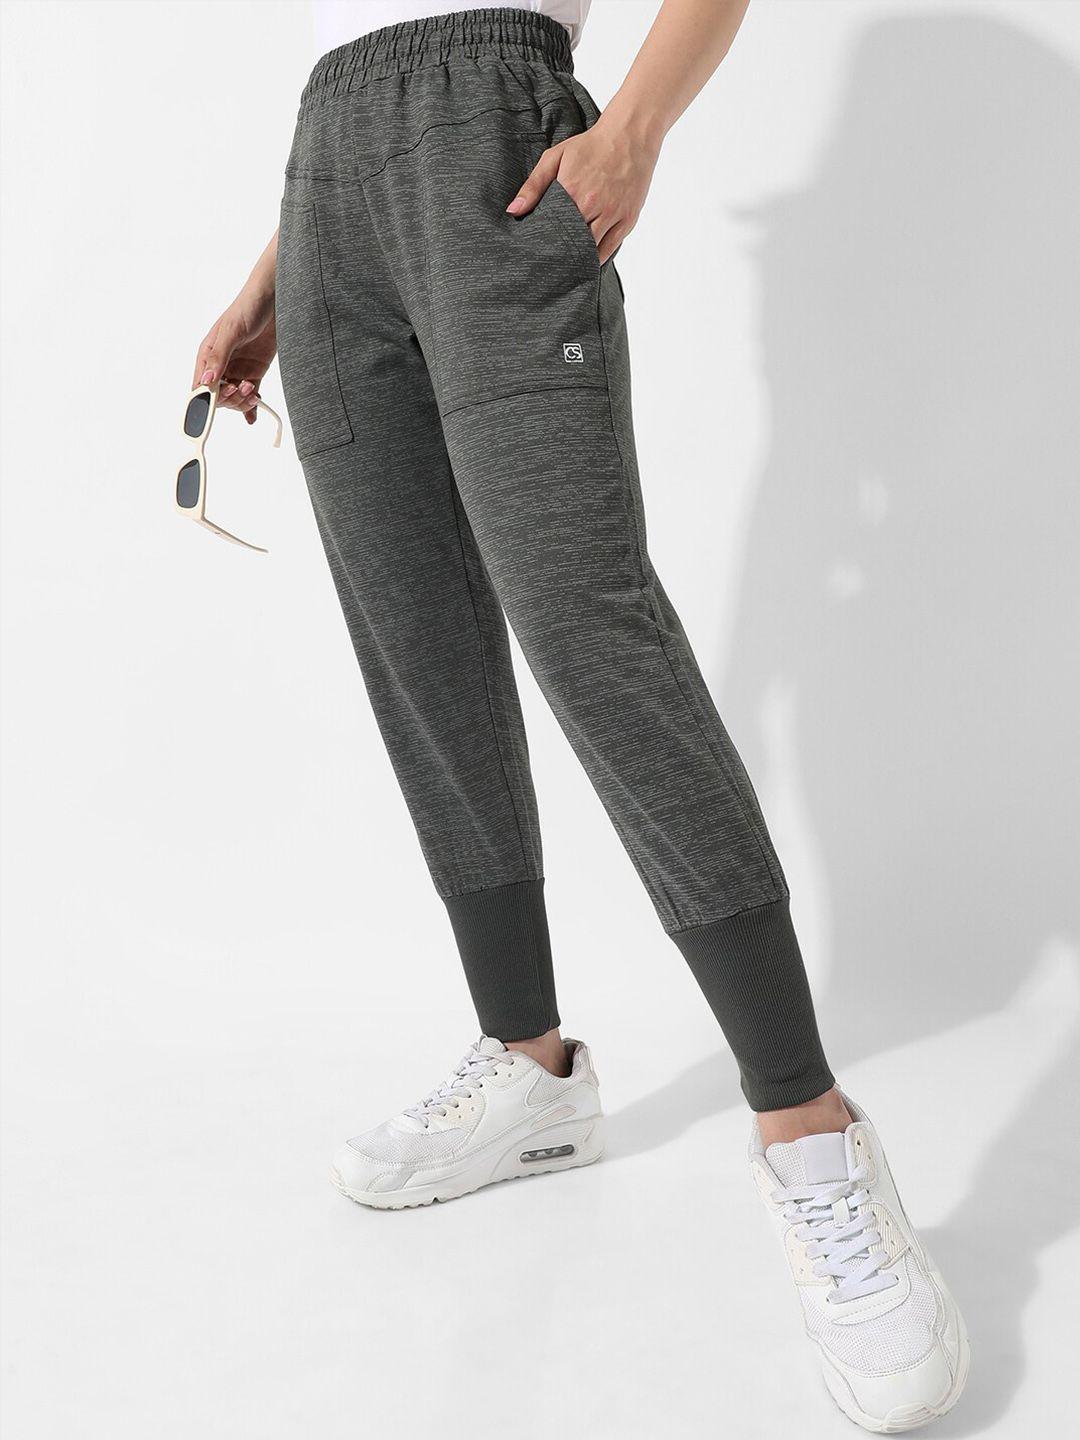 campus sutra grey cotton track pants